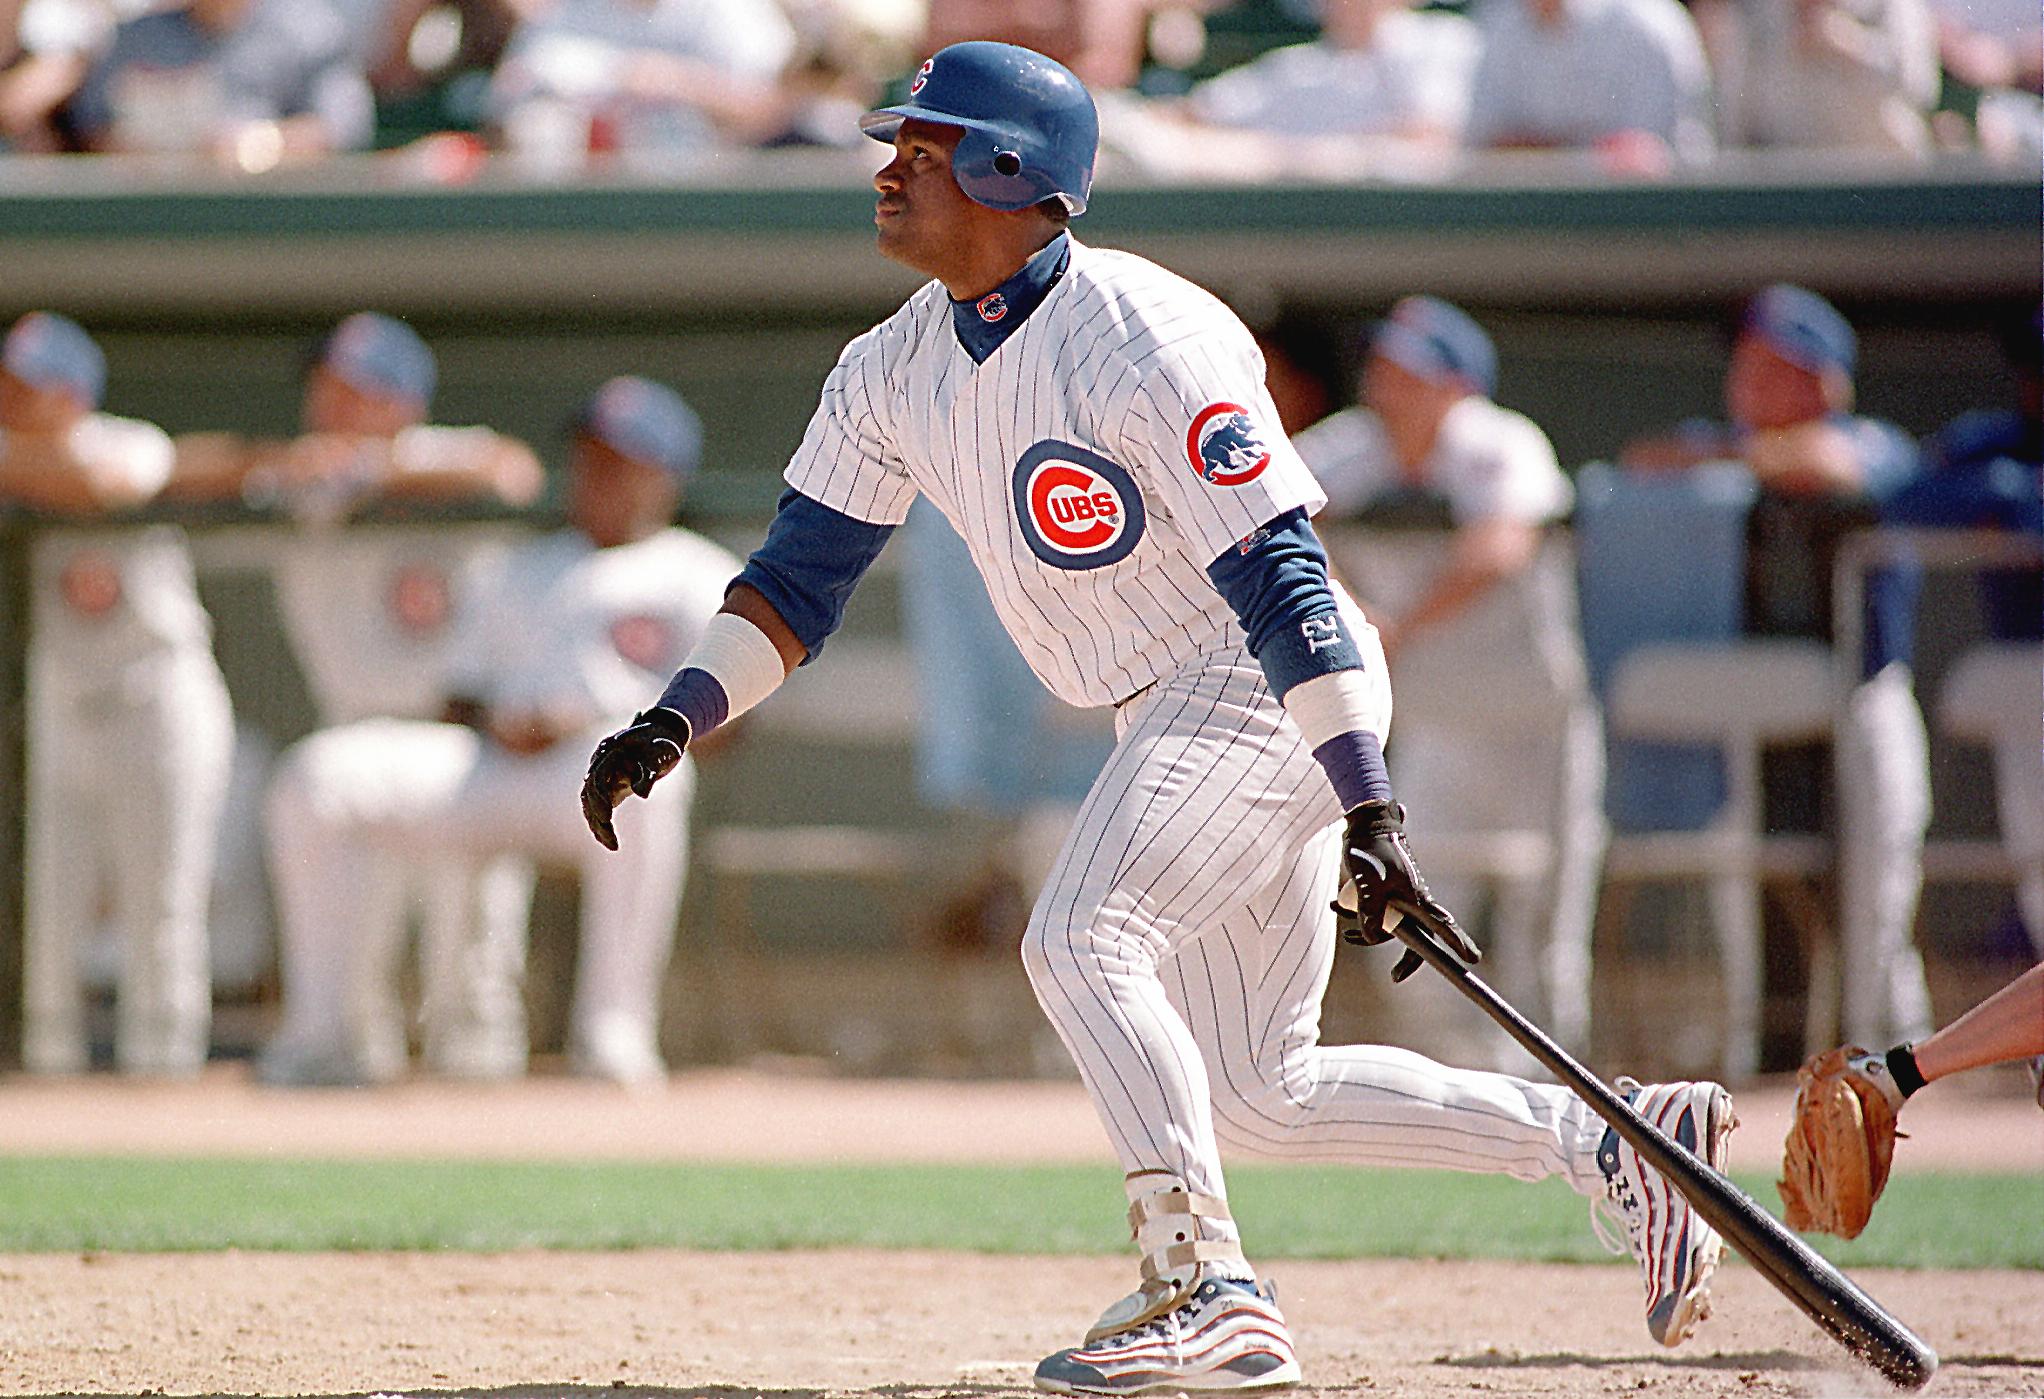 Sammy Sosa continues to deny using performance enhancing drugs